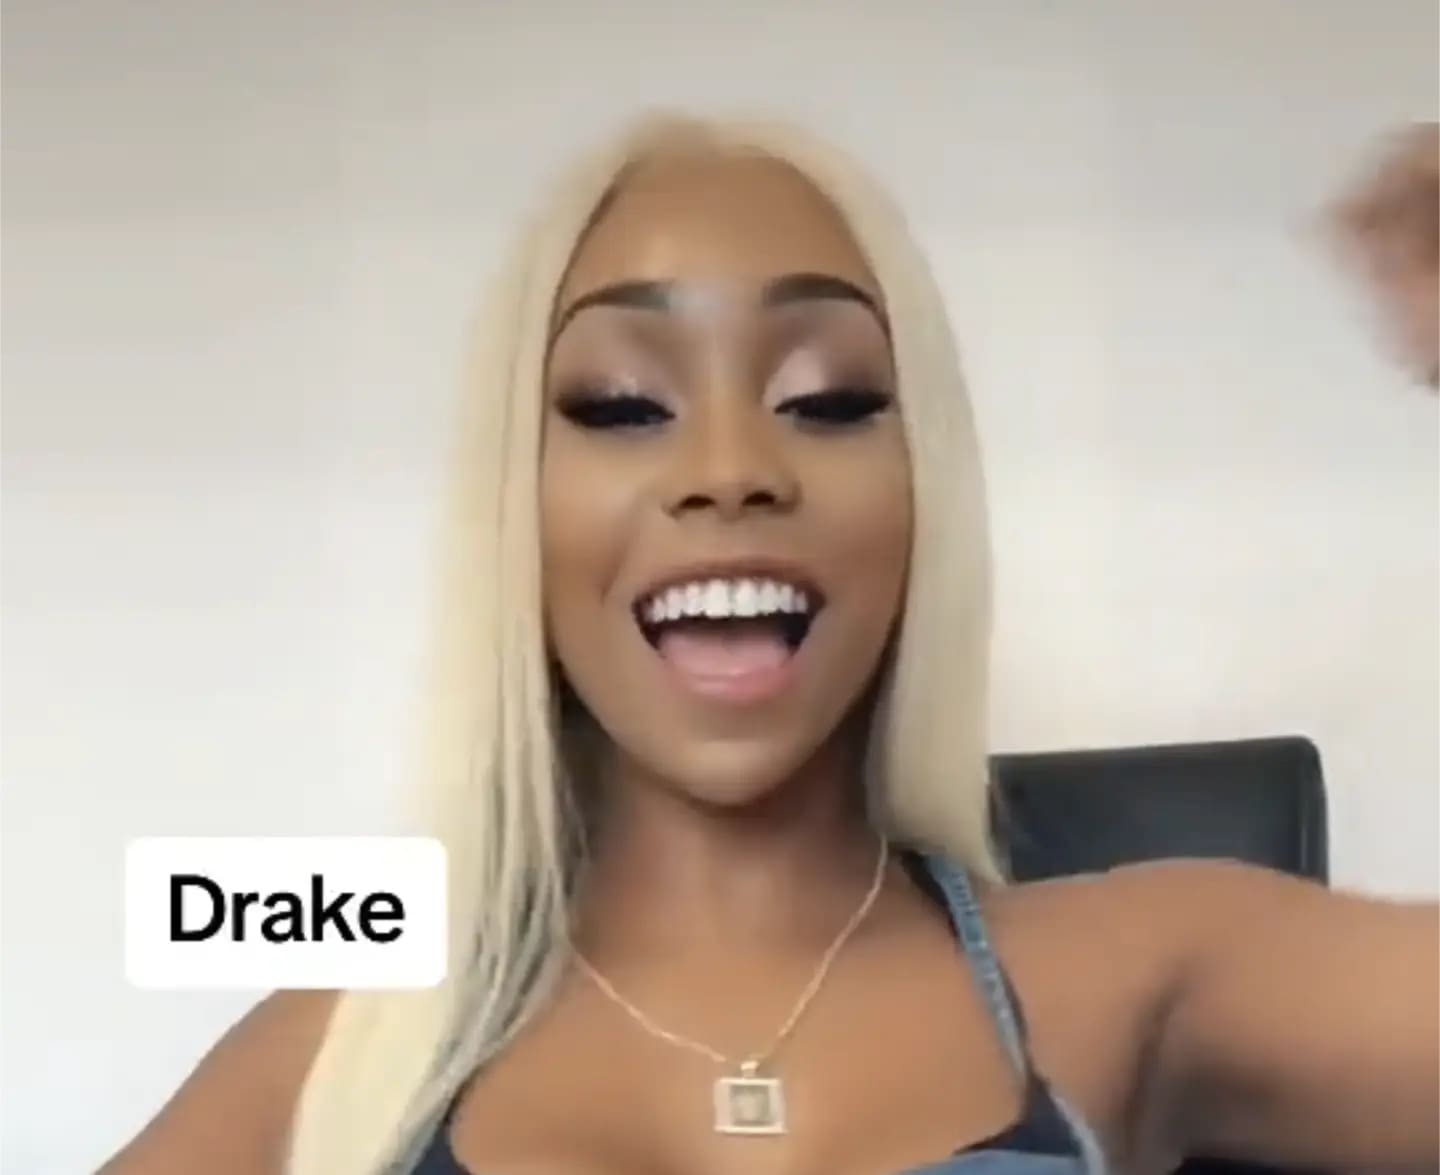 Viral TikTok NPC Star Pinkydoll Asks Drake to Call Her After Finding Out He Likes Cosplay [Video]